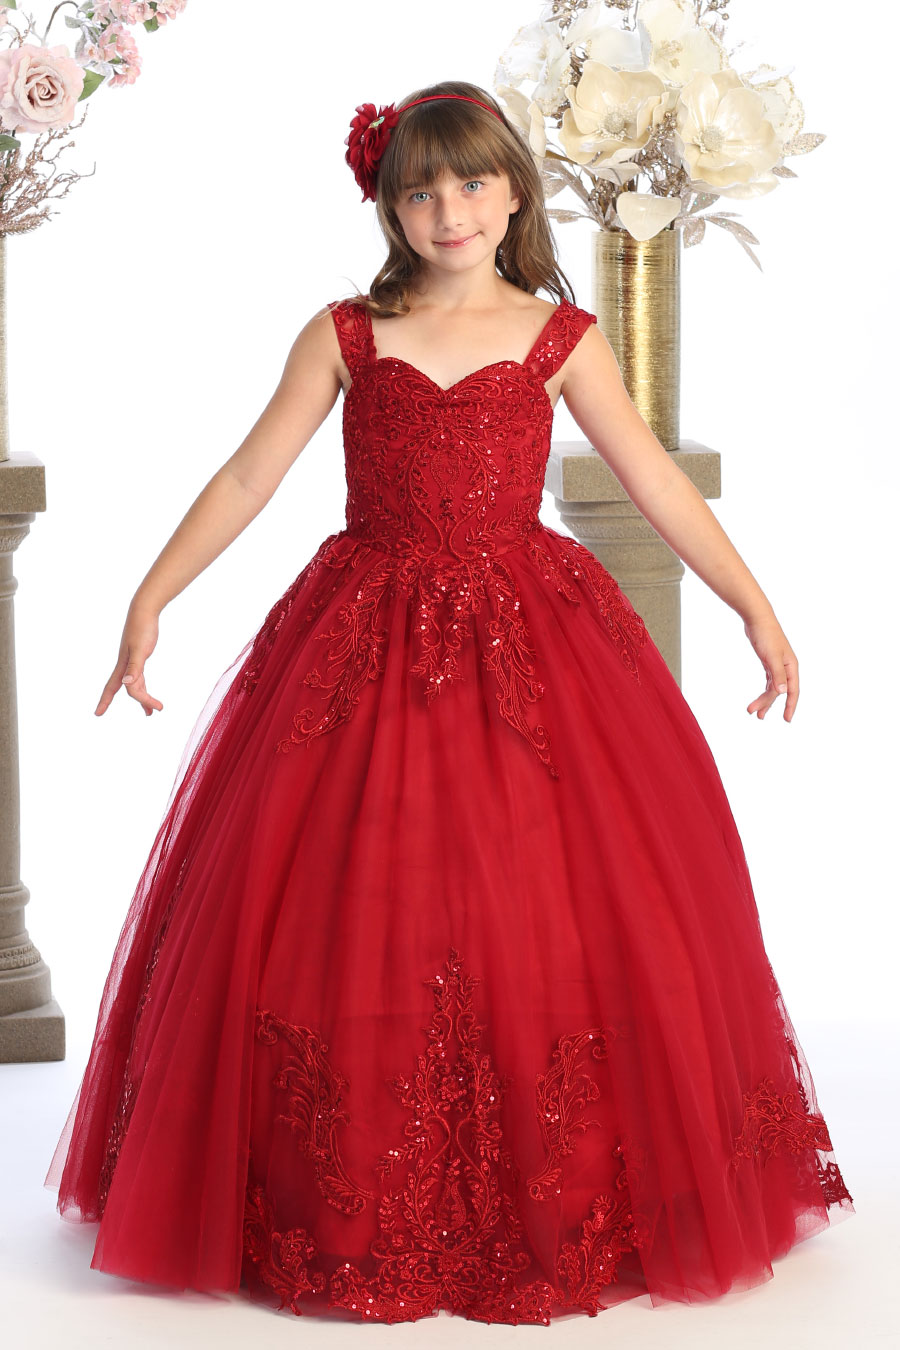 Sequins Kids Dresses For new Year Party Dress Children Pageant Gown  Princess Wedding Dress for Girls Dress Toddler Girl Dresses